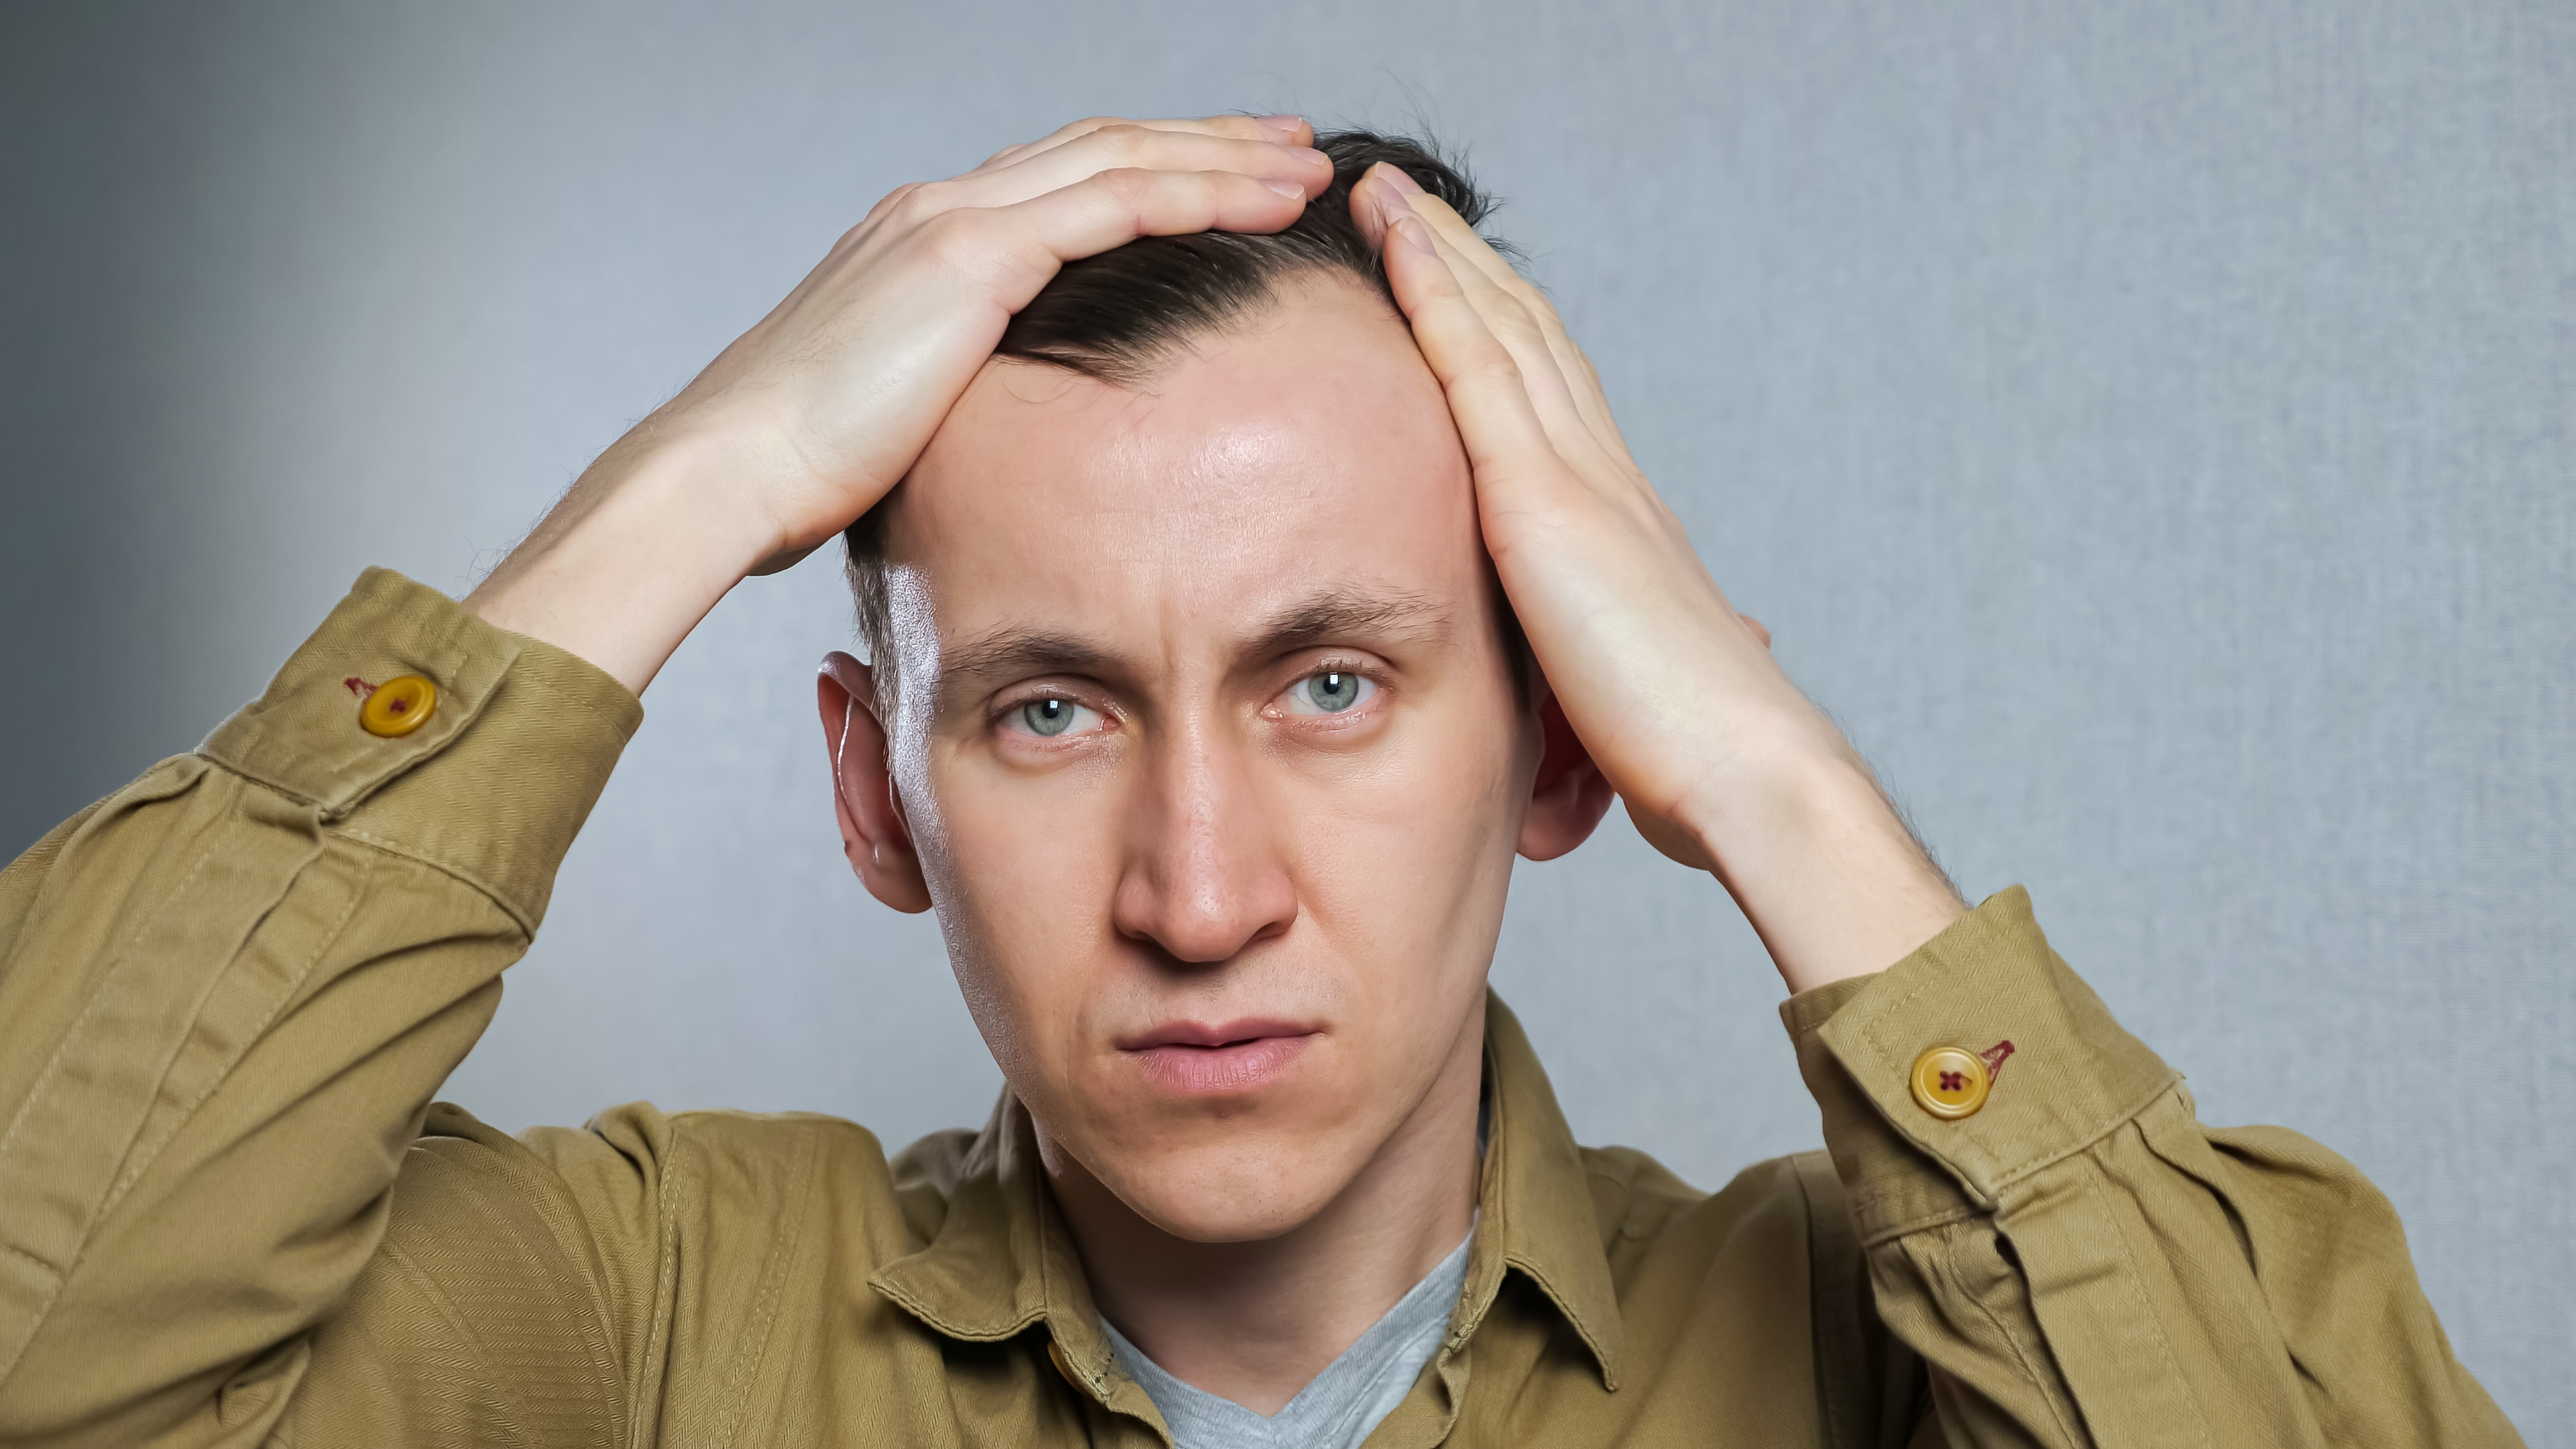 A receding hairline is a common sign of thinning hair.